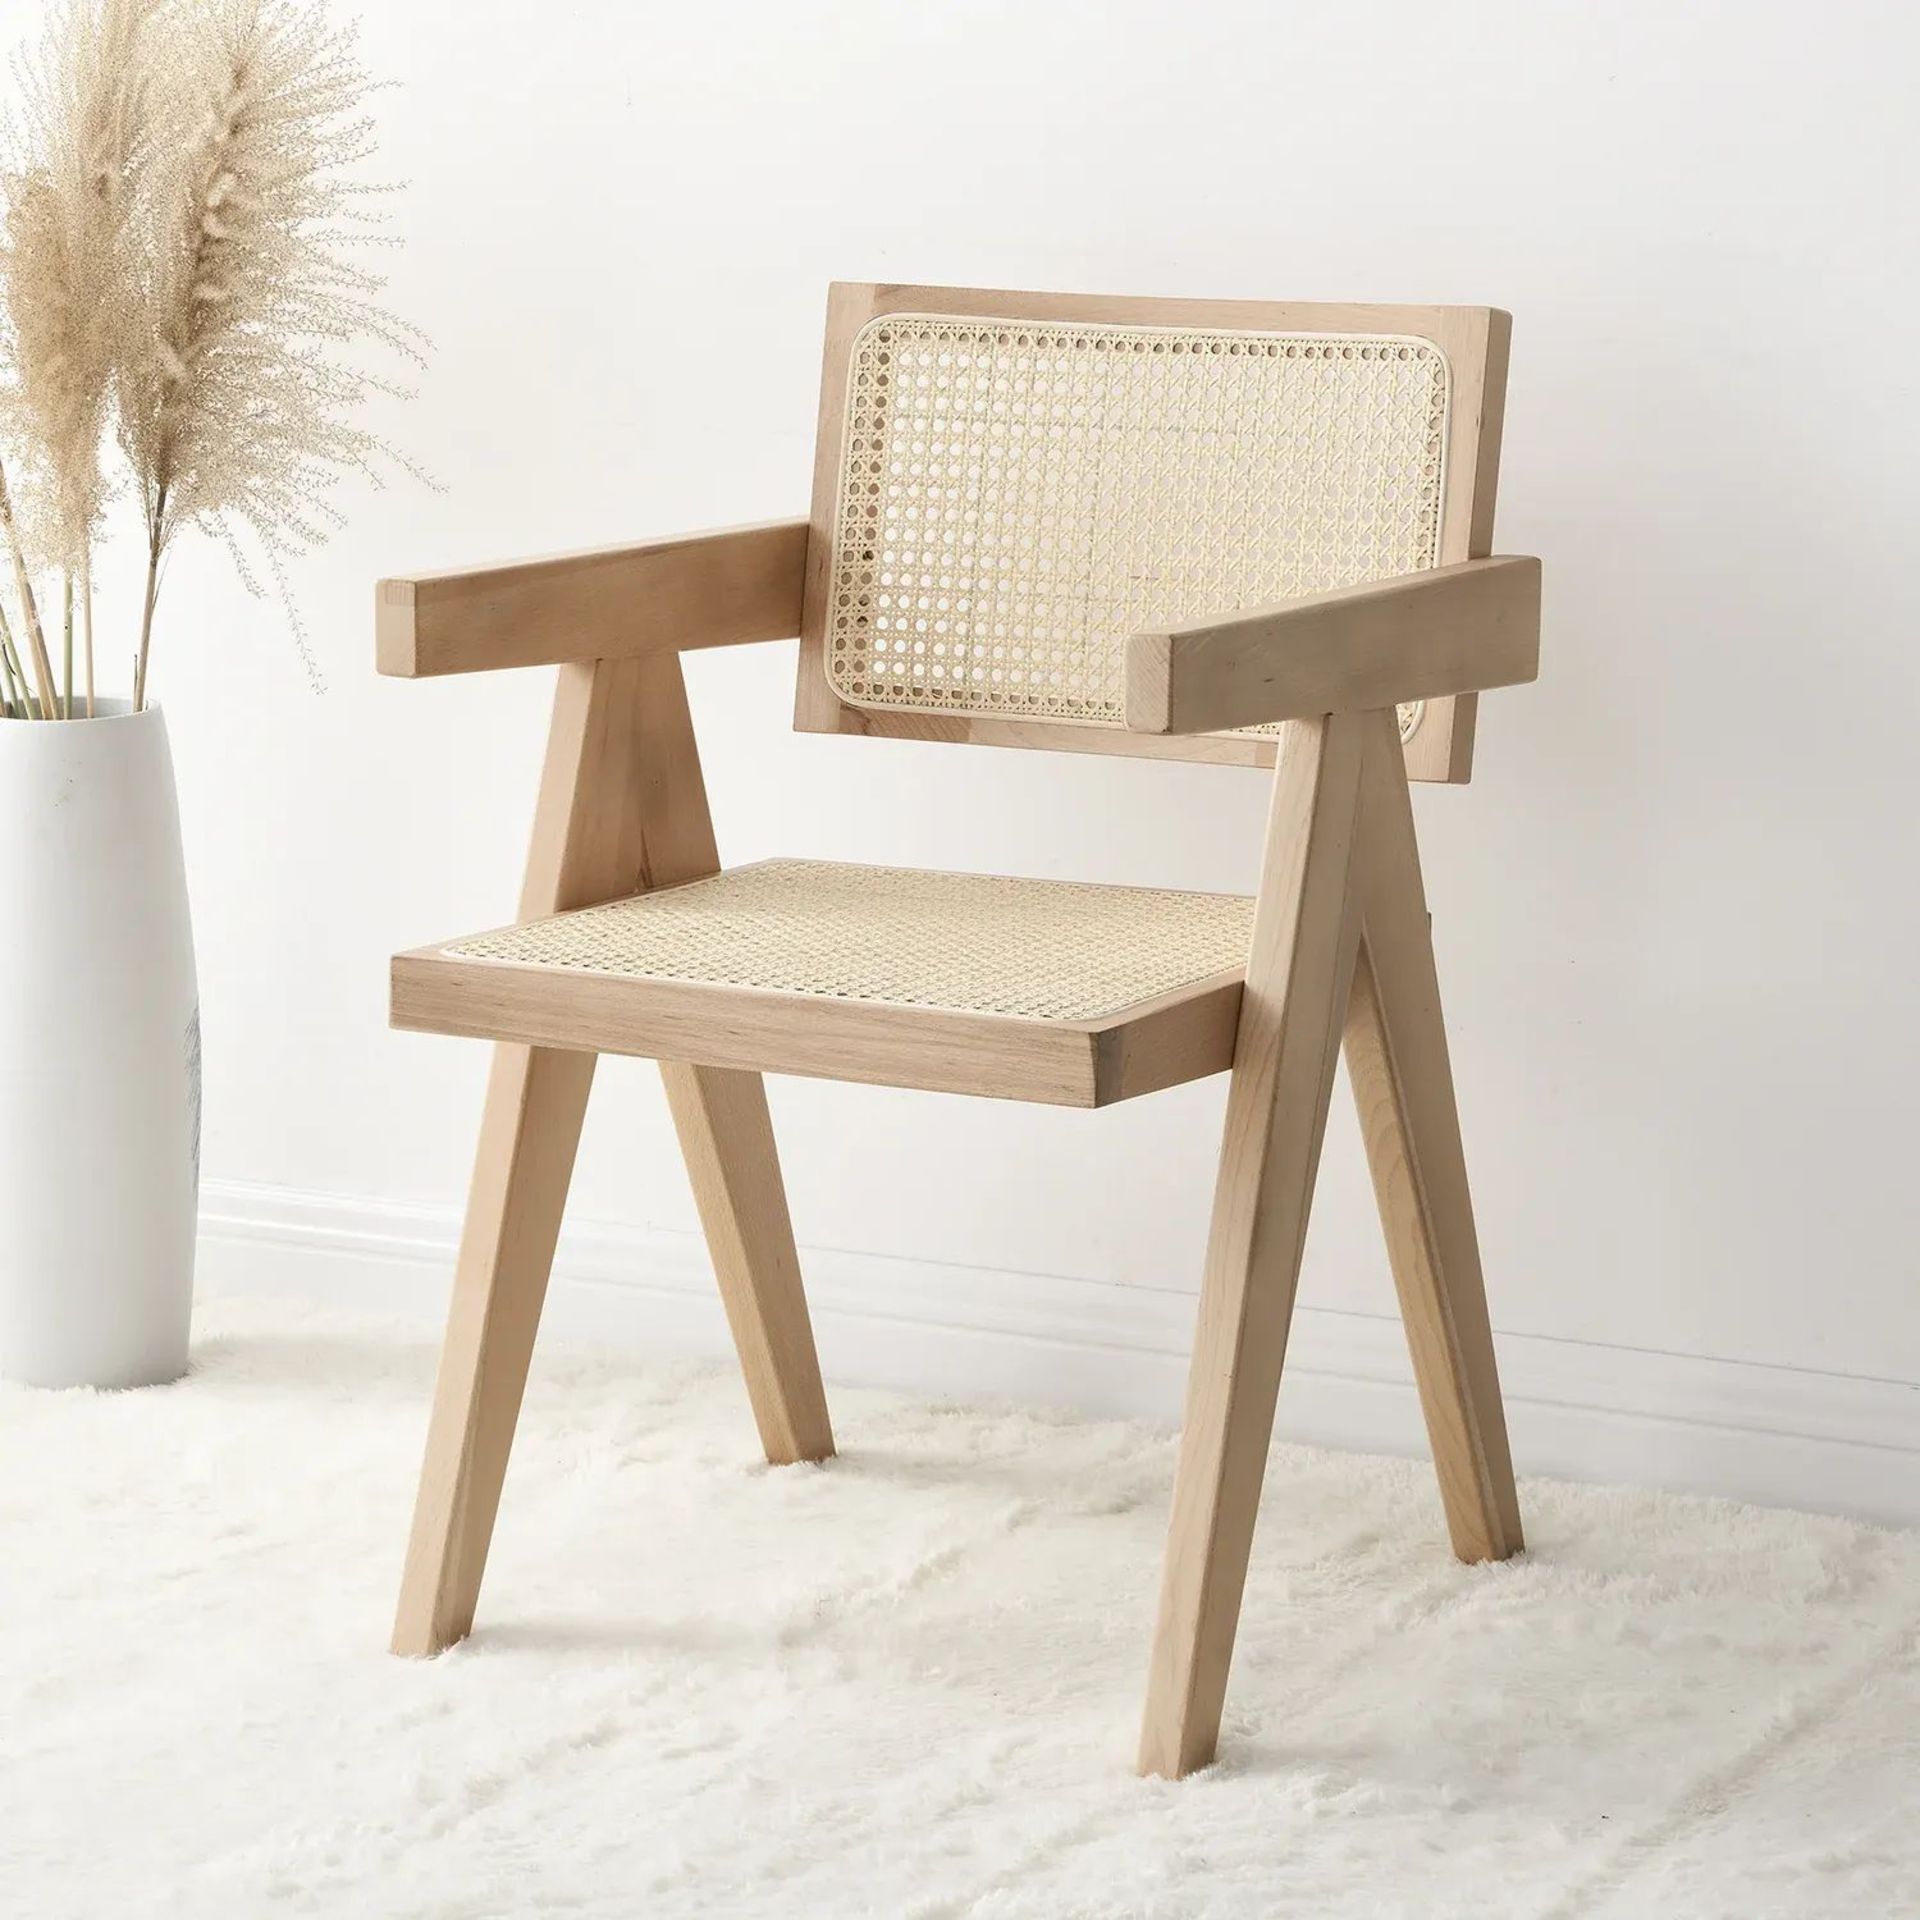 Jeanne Natural Colour Cane Rattan Solid Beech Wood Dining Chair. - SR25. RRP £199.99. The cane